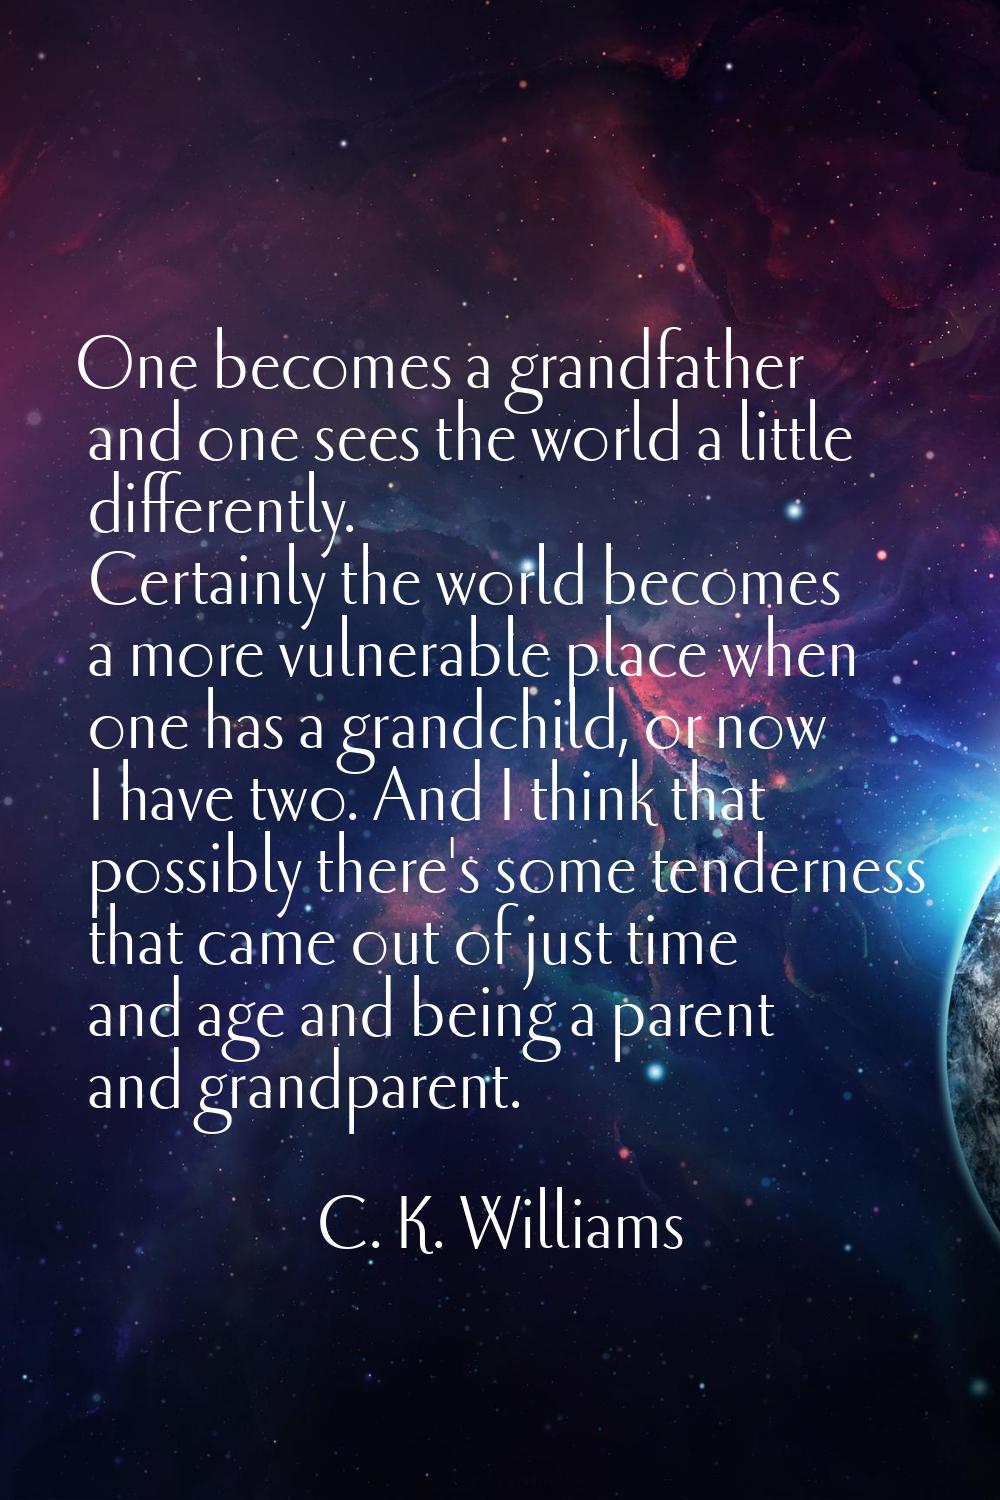 One becomes a grandfather and one sees the world a little differently. Certainly the world becomes 